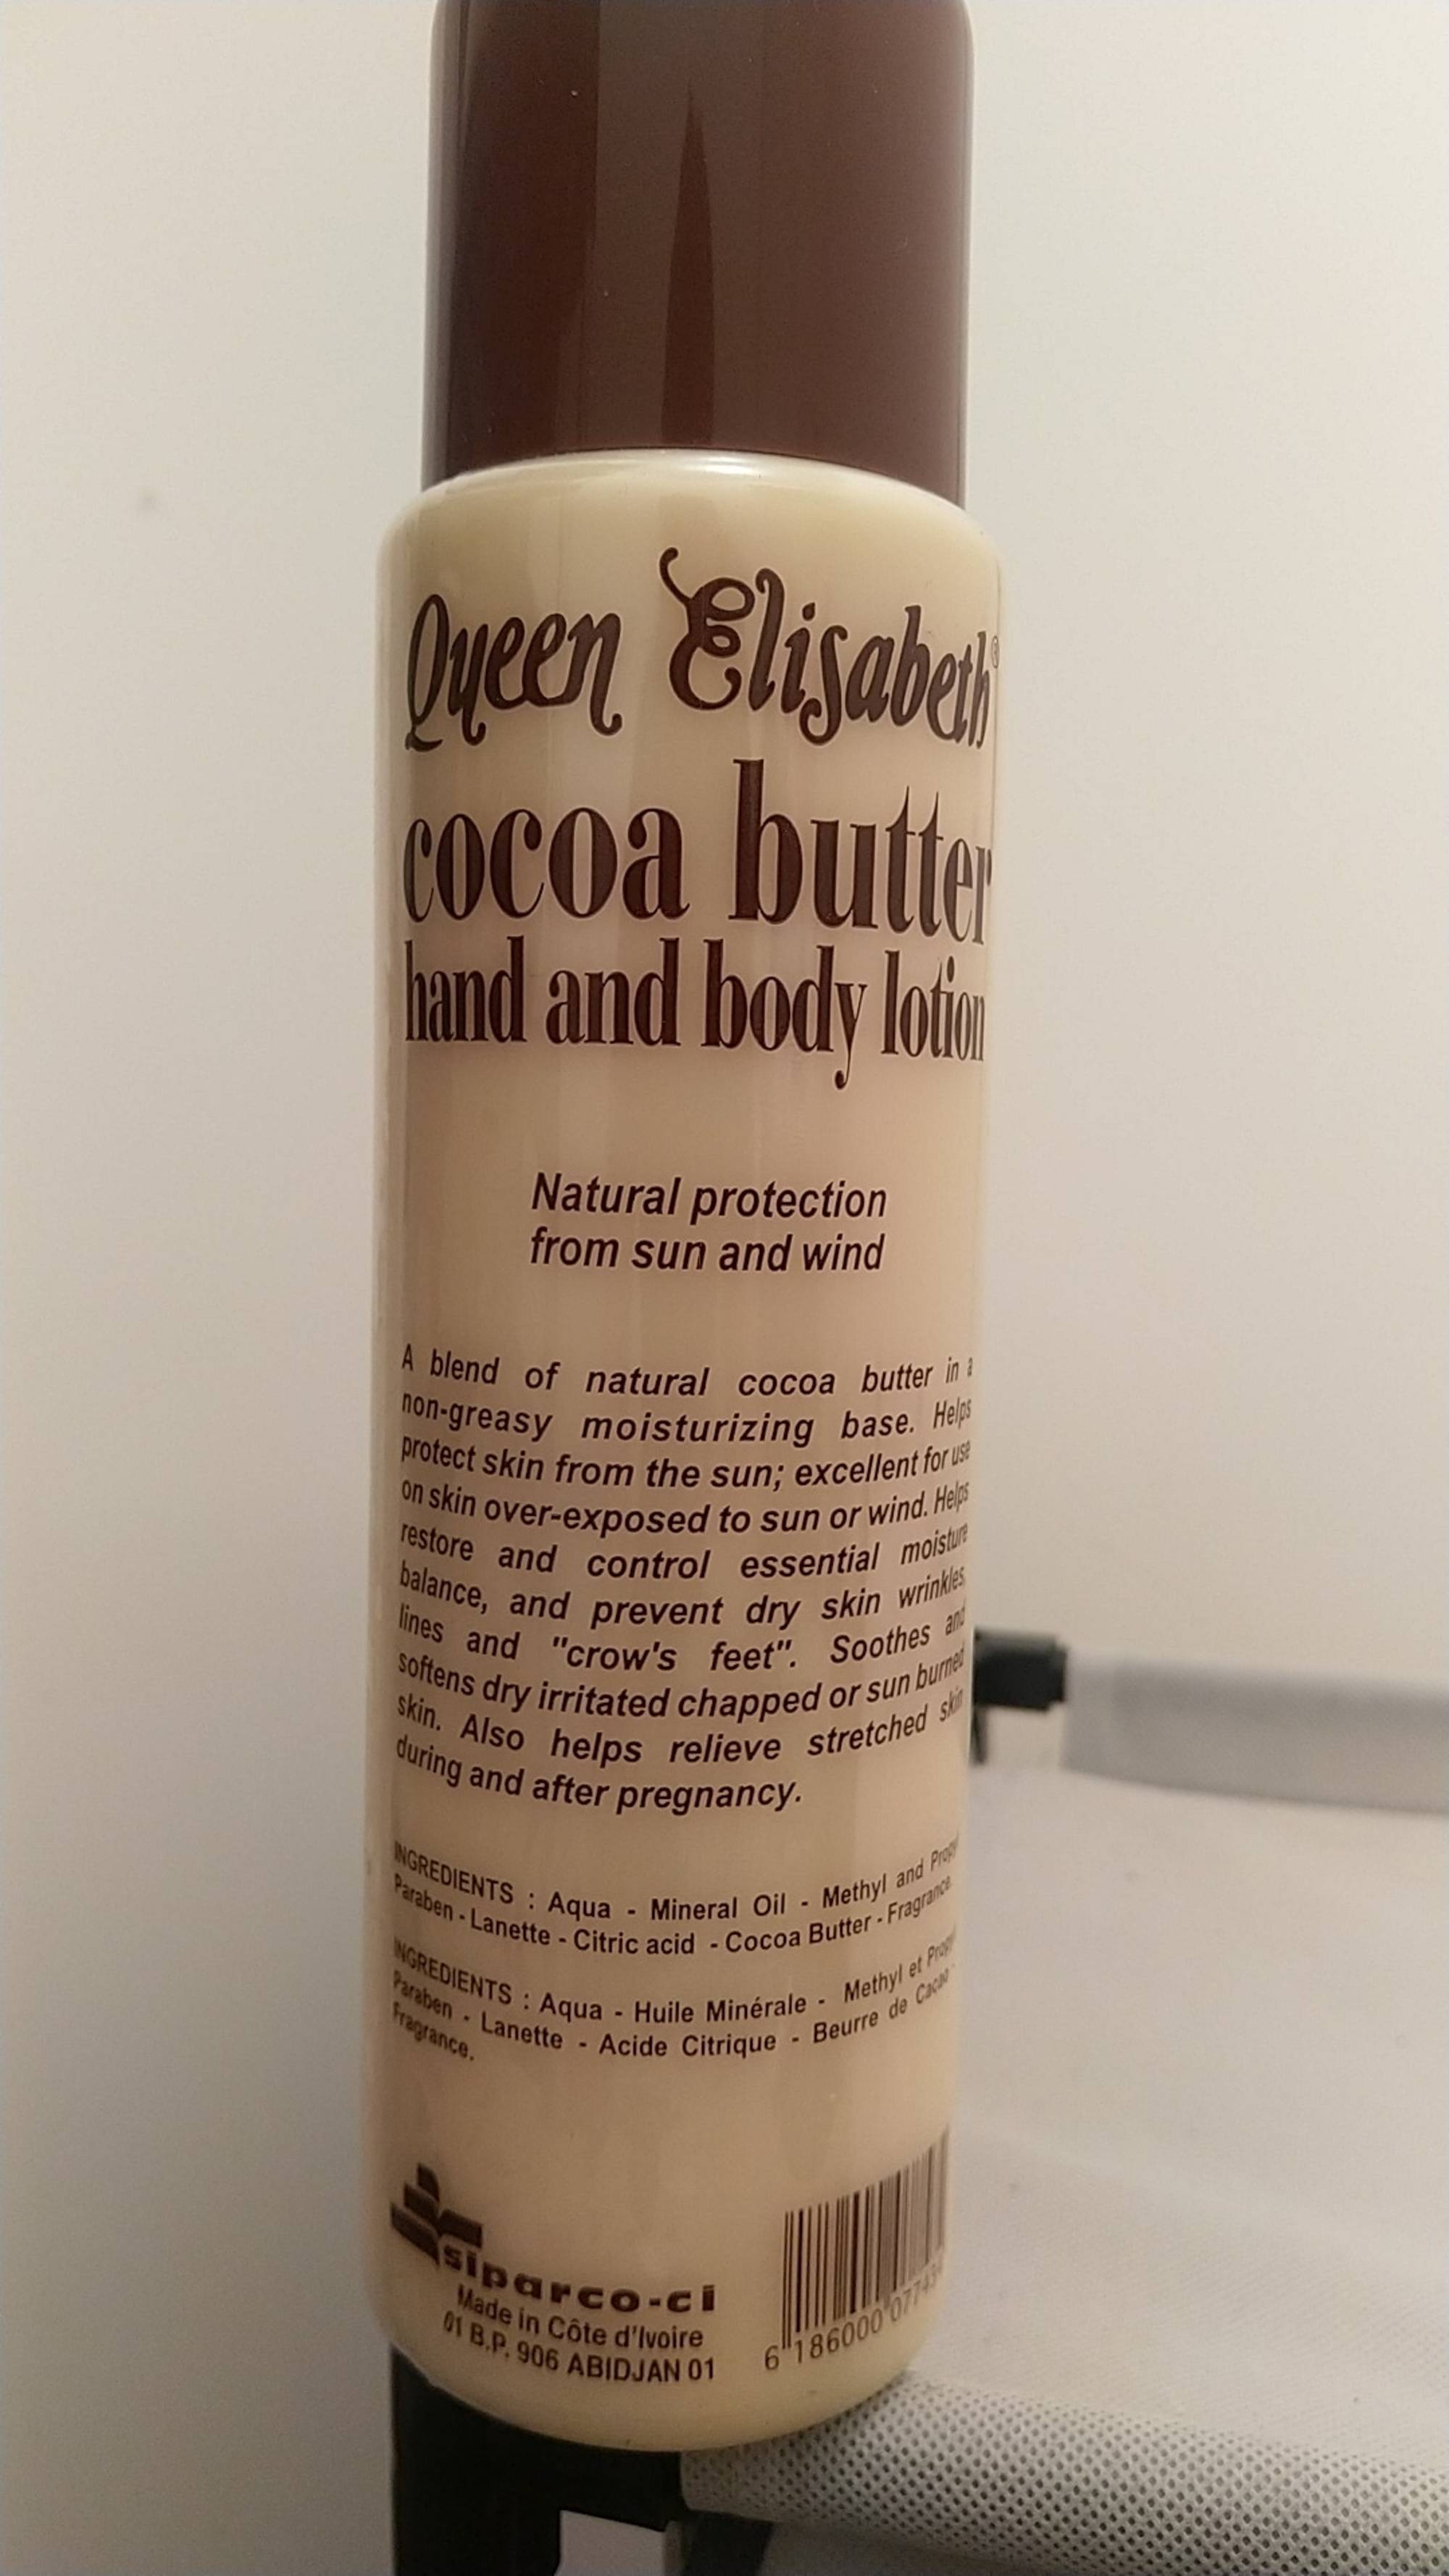 QUEEN ELISABETH - Cocoa butter - Hand and body lotion